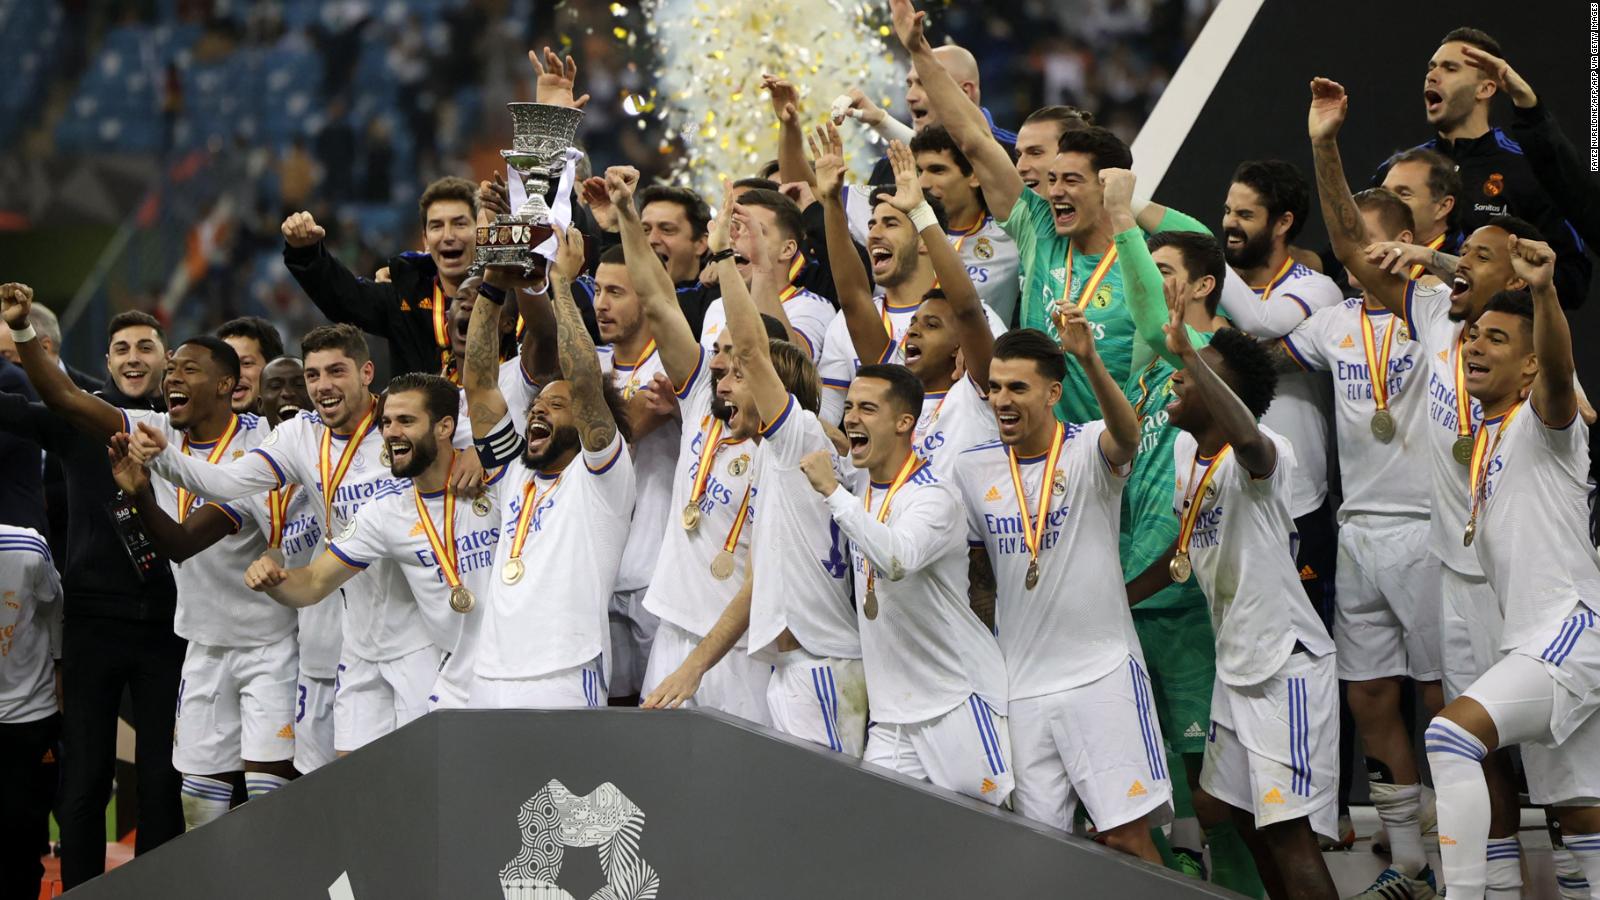 With the new Super Cup title, Real Madrid confirms that it is the team